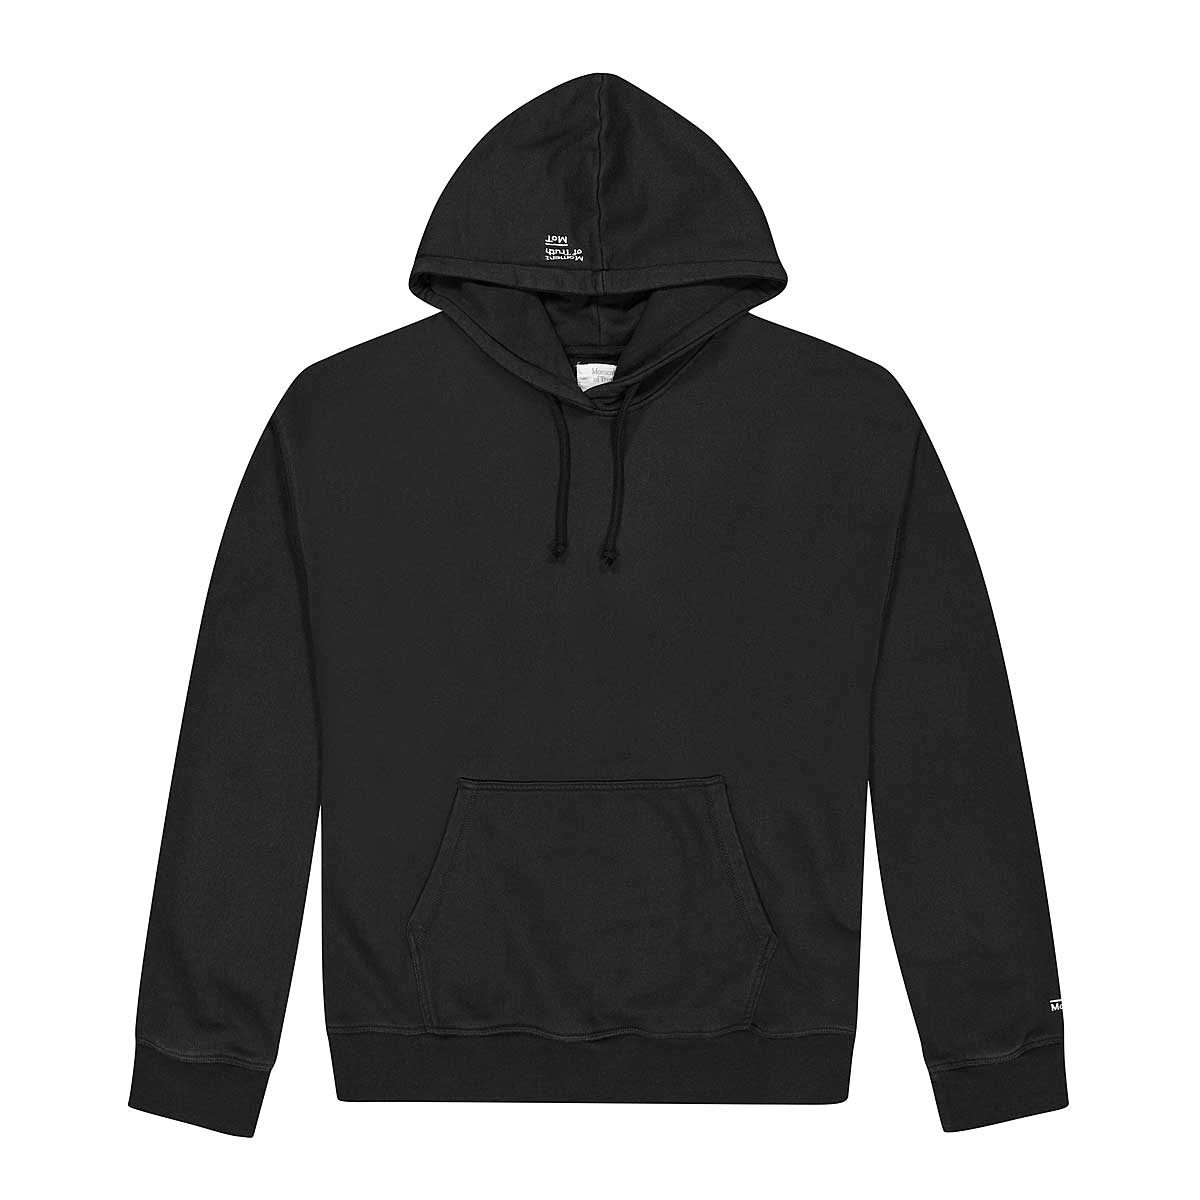 Moment Of Truth Lux Hoody, Black